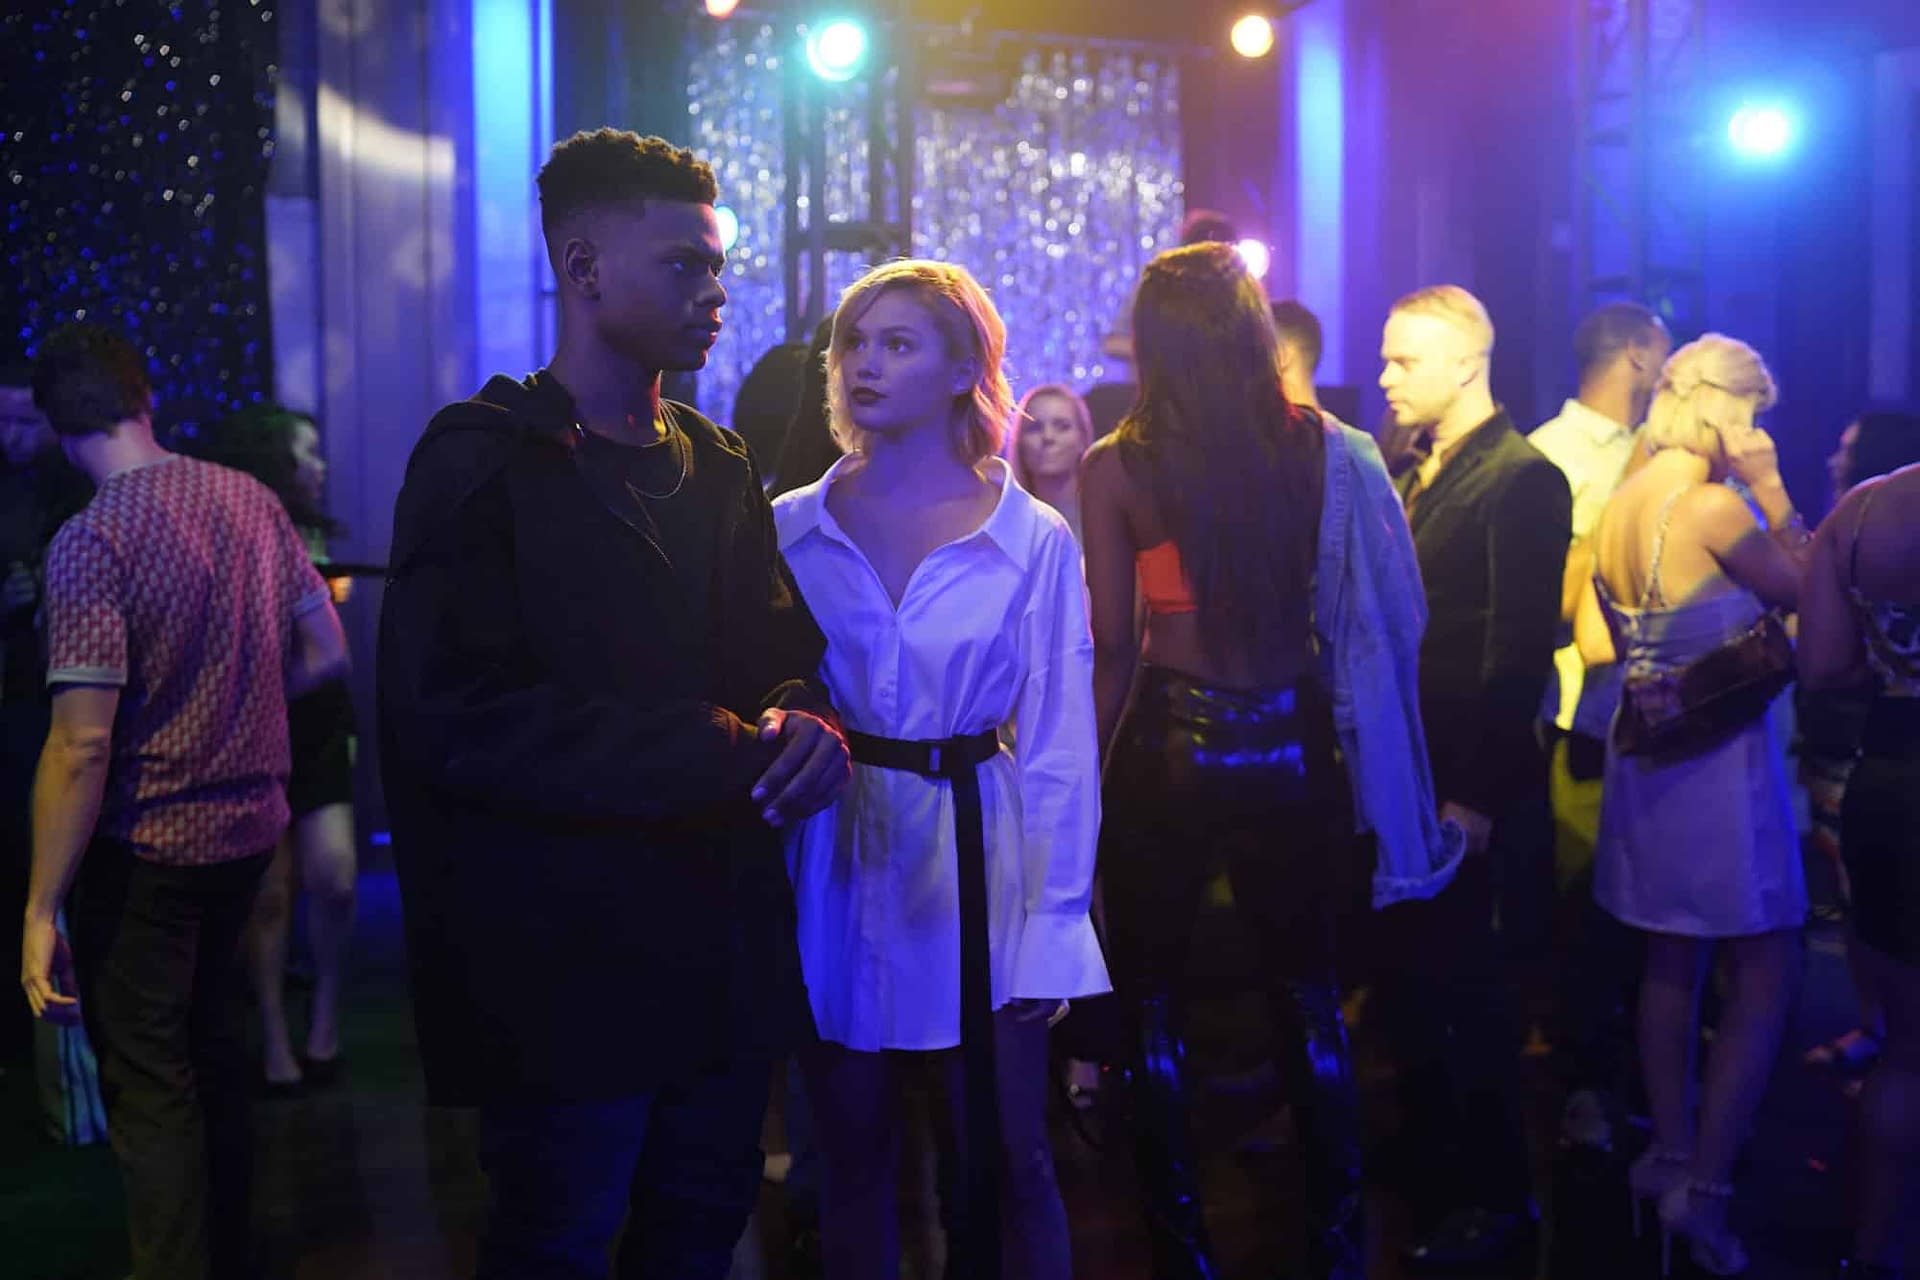 Cloak and Dagger Season 2: A Summary and 44 New Images from the Premiere